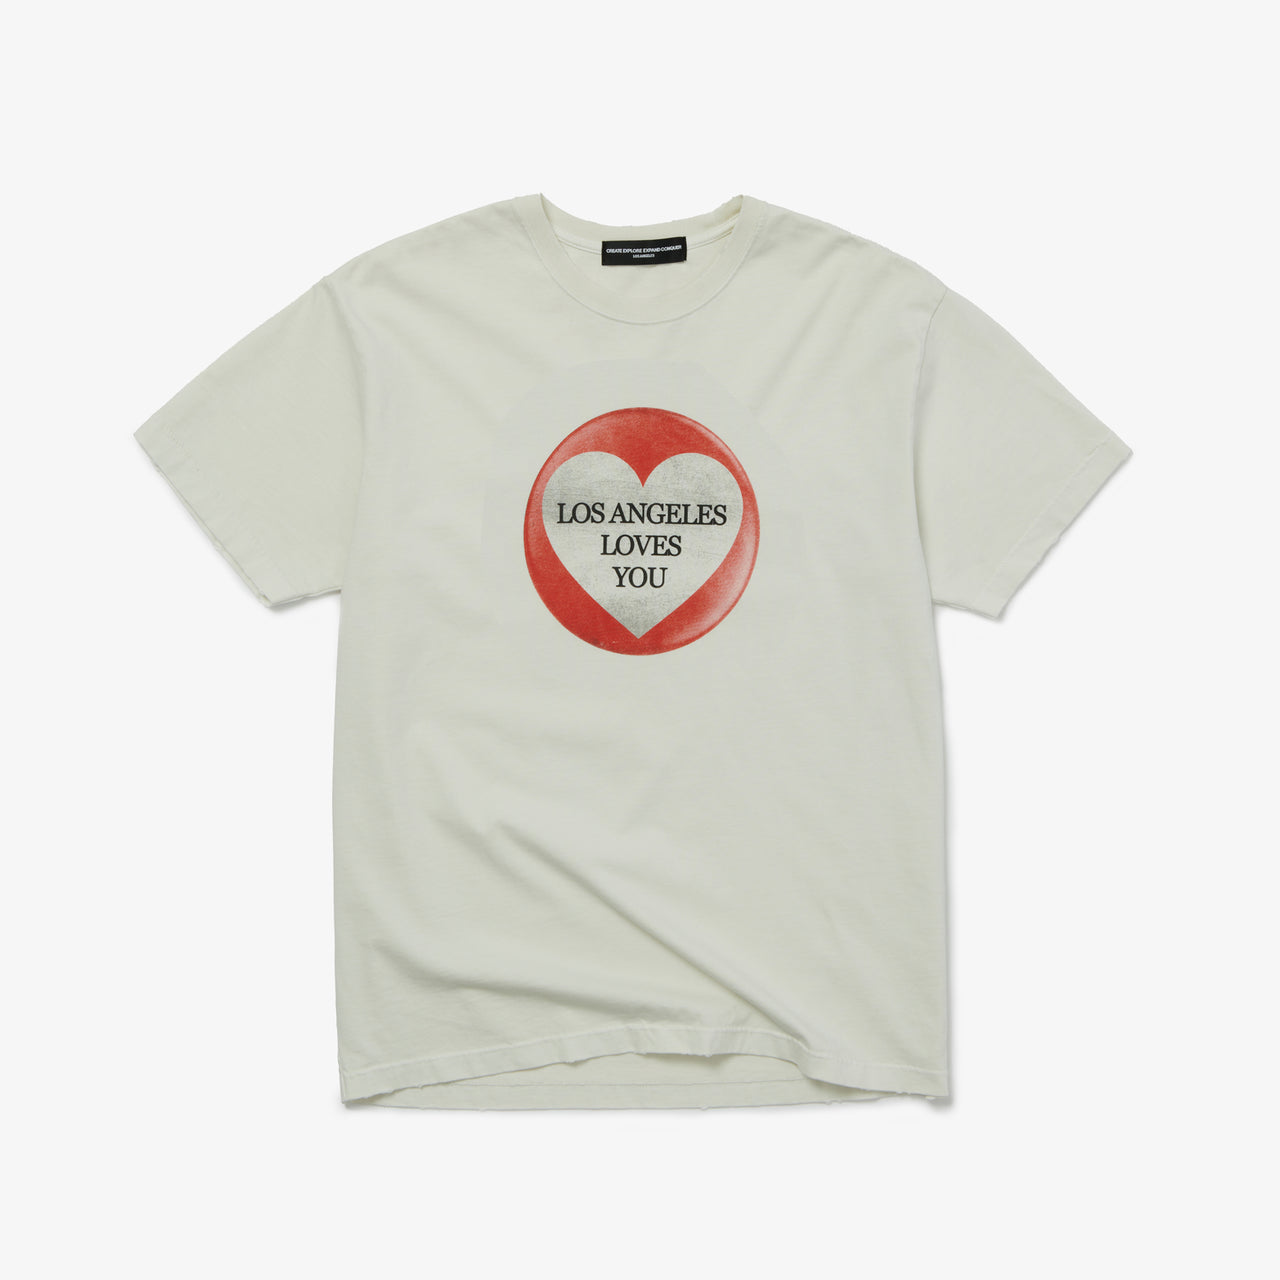 Los Angeles Loves You T-Shirt in Vintage White